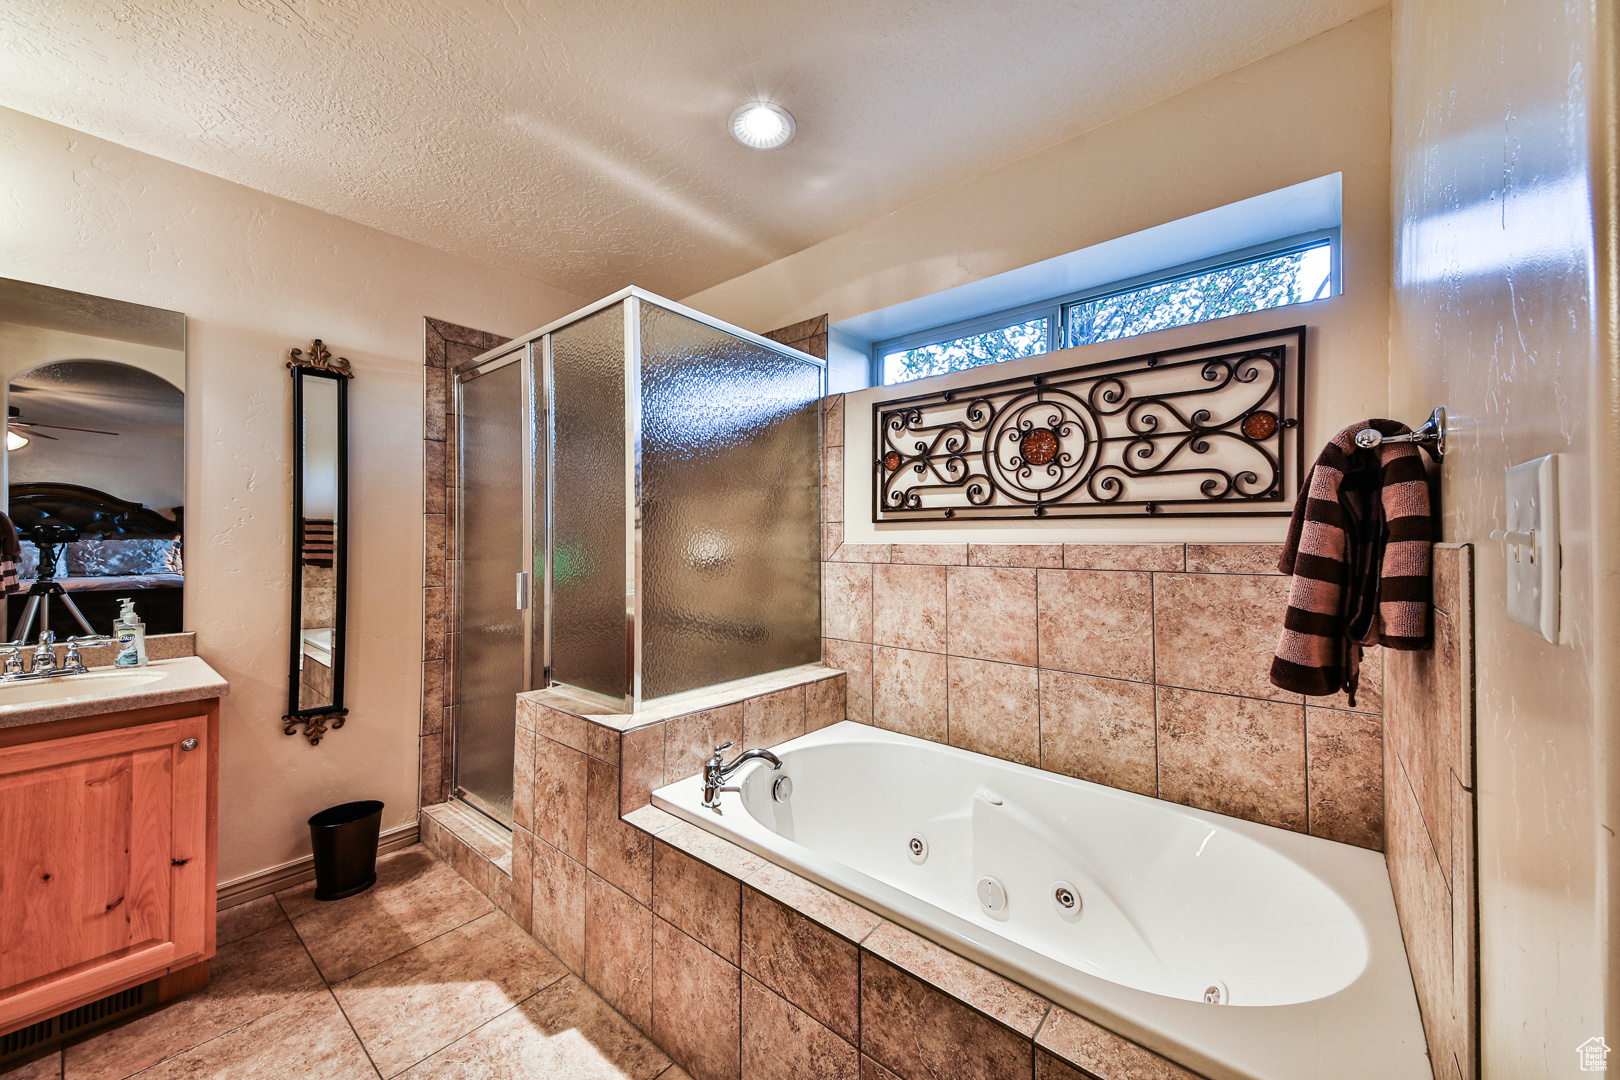 Bathroom with tile flooring, independent shower and bath, vanity, and a textured ceiling